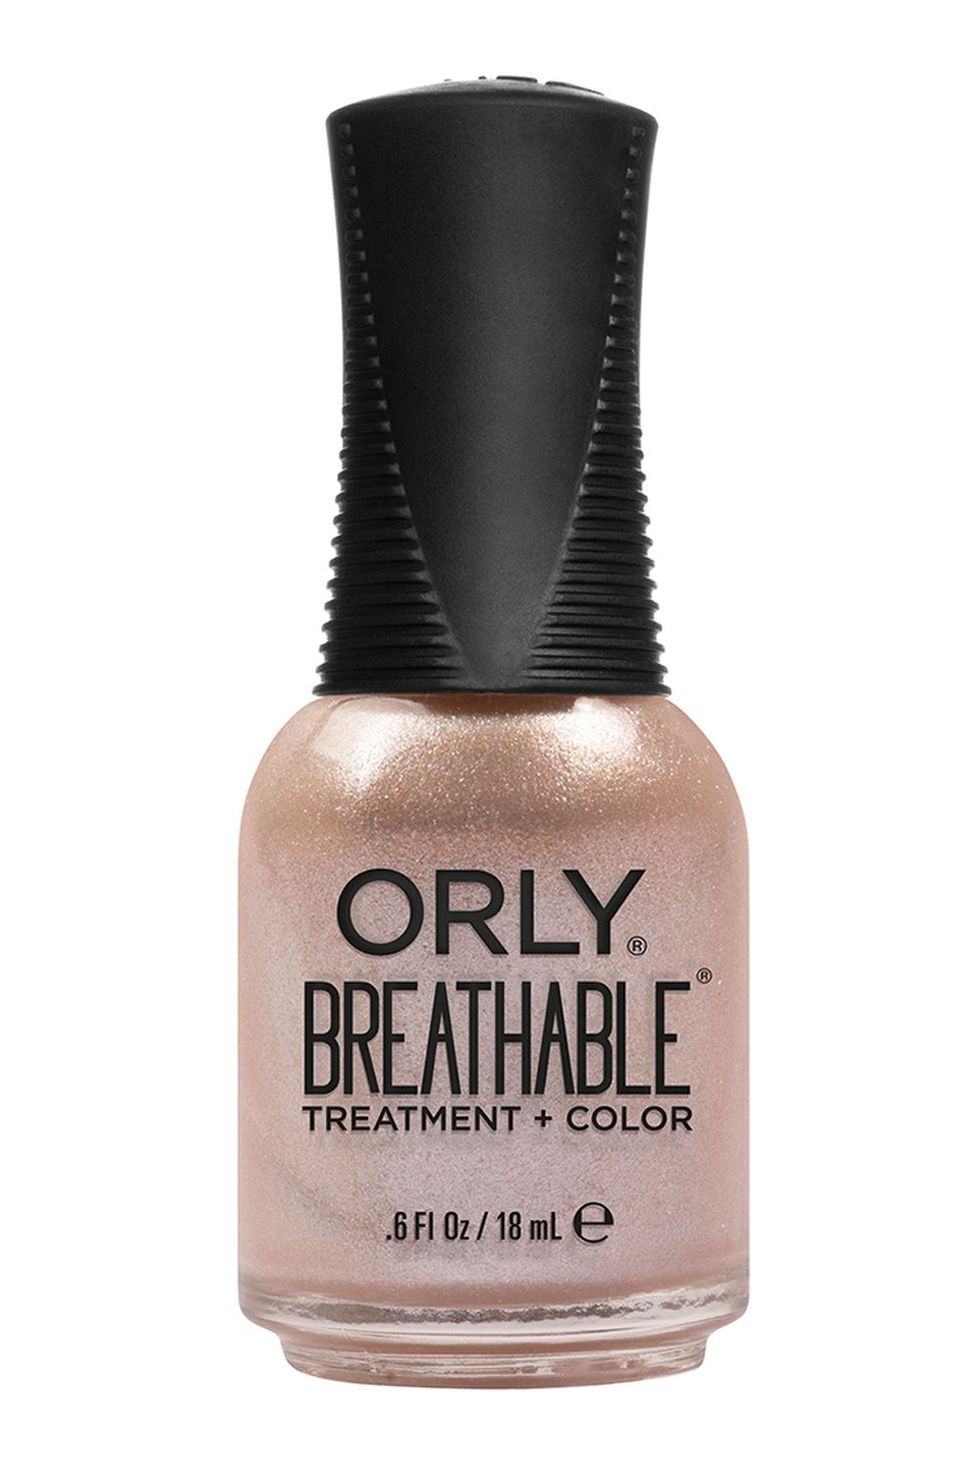 Orly Breathable Treatment + Color in Let's Get Fizzical